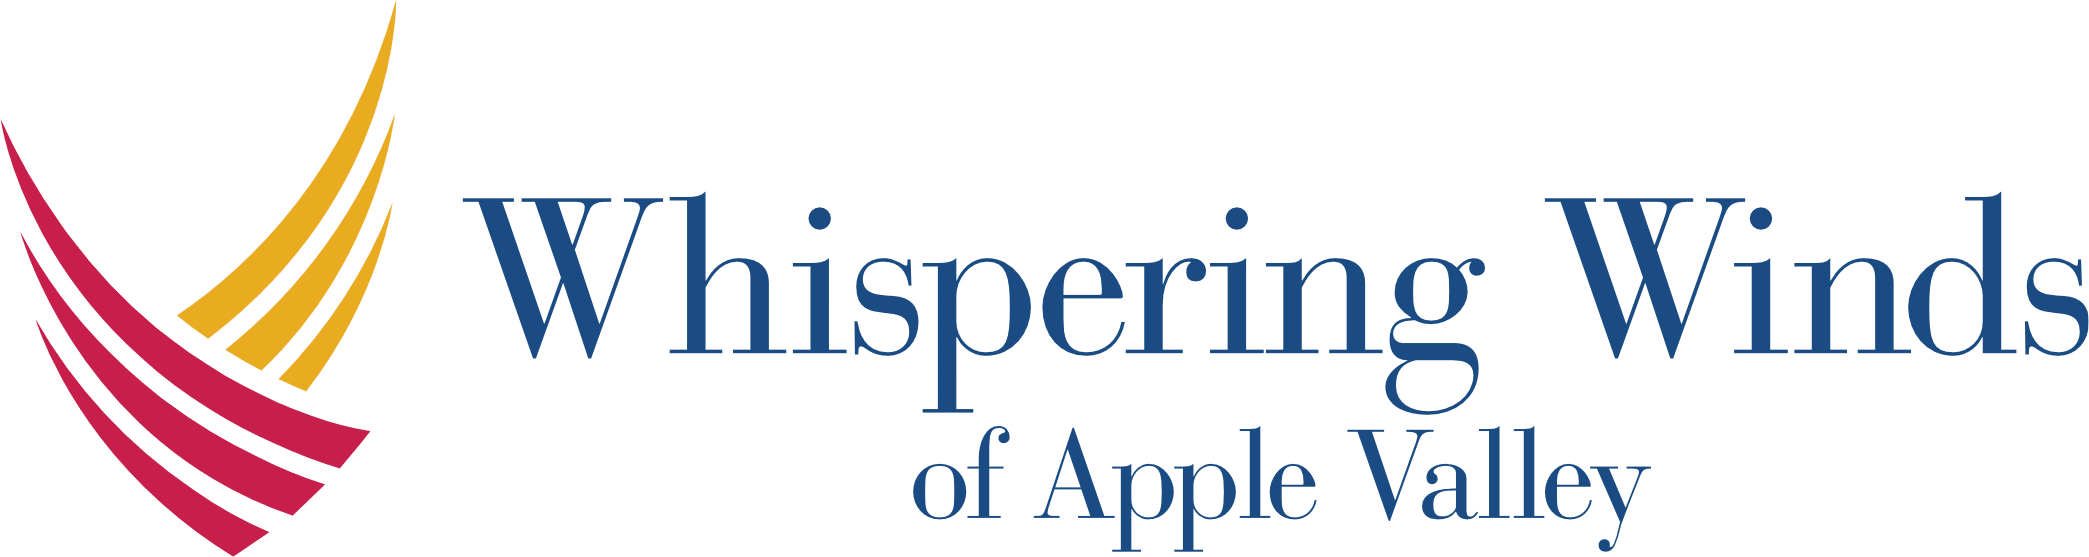 Whispering Winds of Apple Valley | Logo